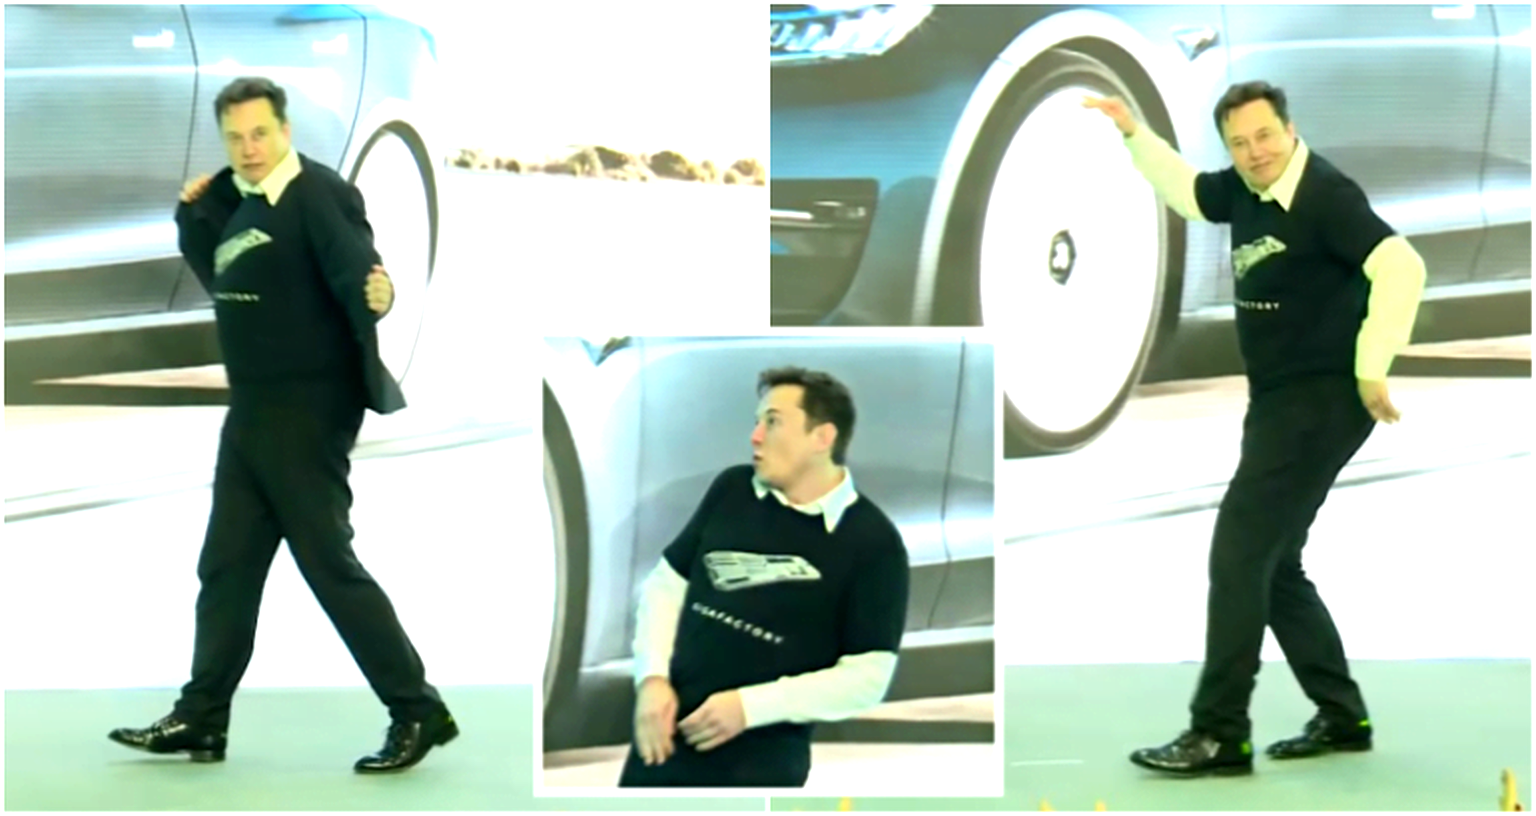 Elon Musk Wins the Internet With Bizarre ‘Uncle’ Dance at Tesla Factory in China